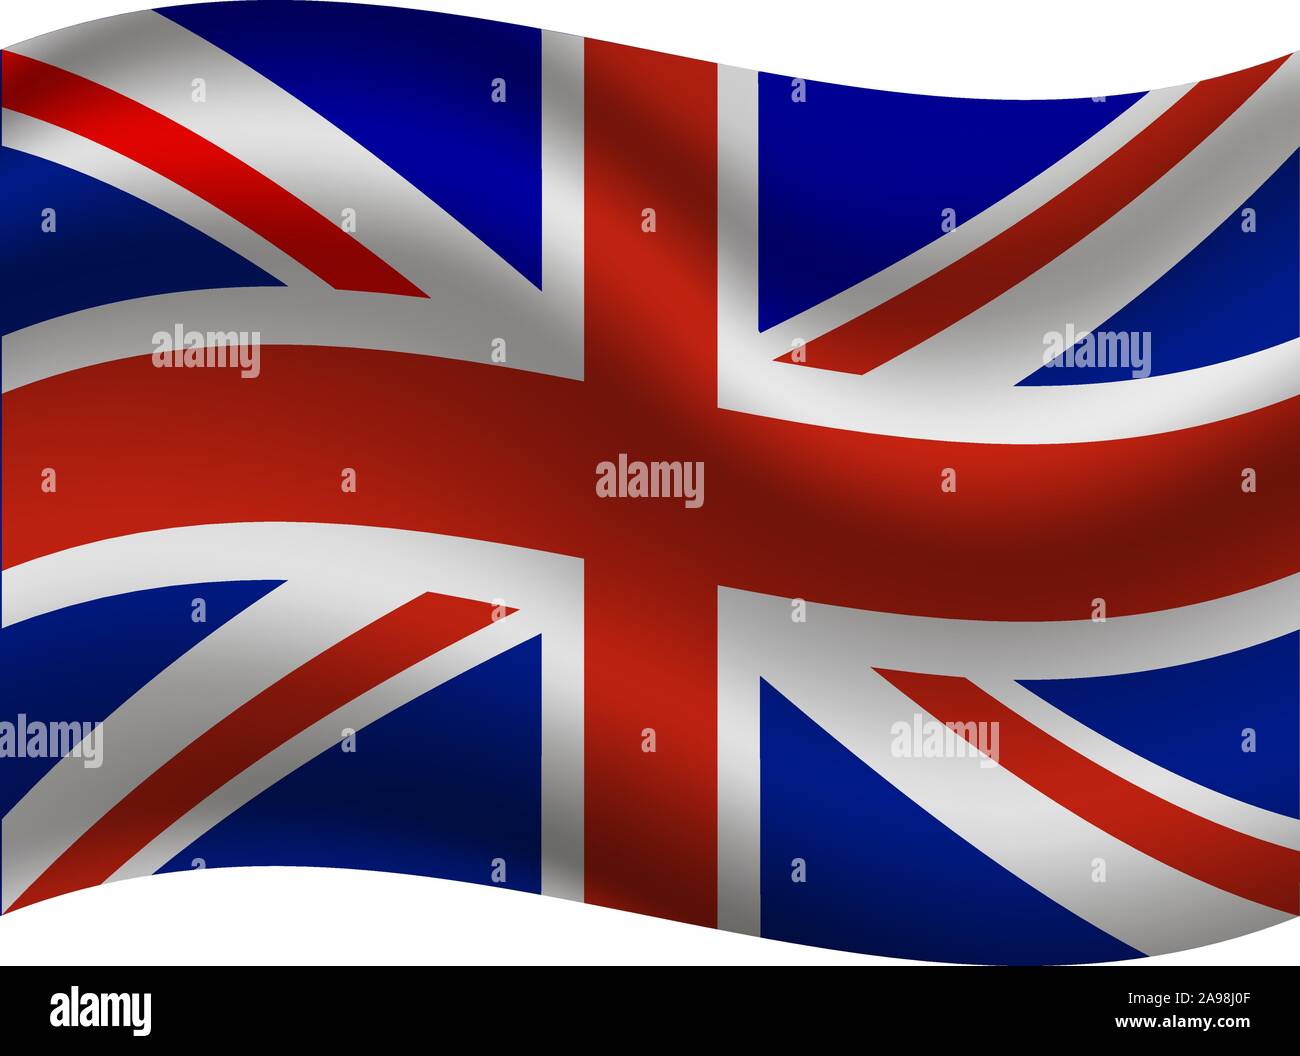 Pride of britain Stock Vector Images - Alamy